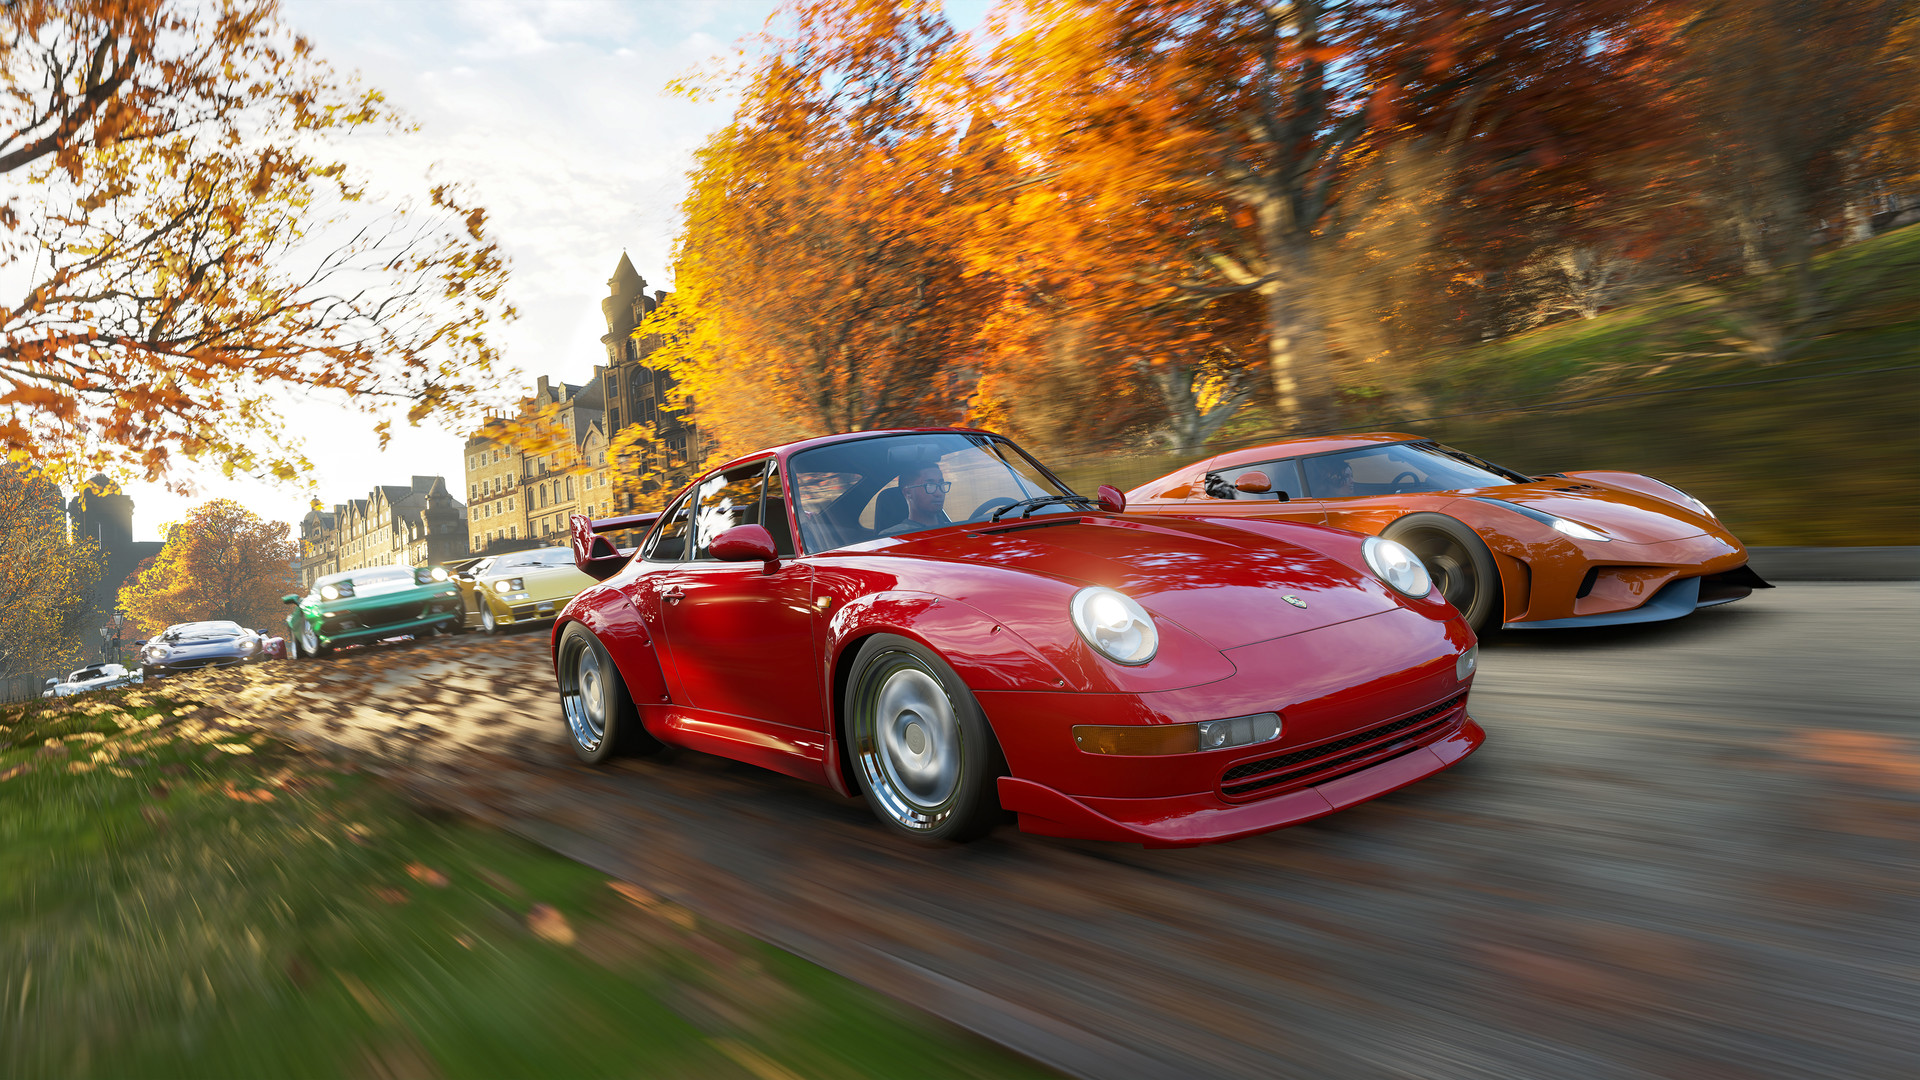 download Forza Horizon 4 Ultimate Edition PC via torrent